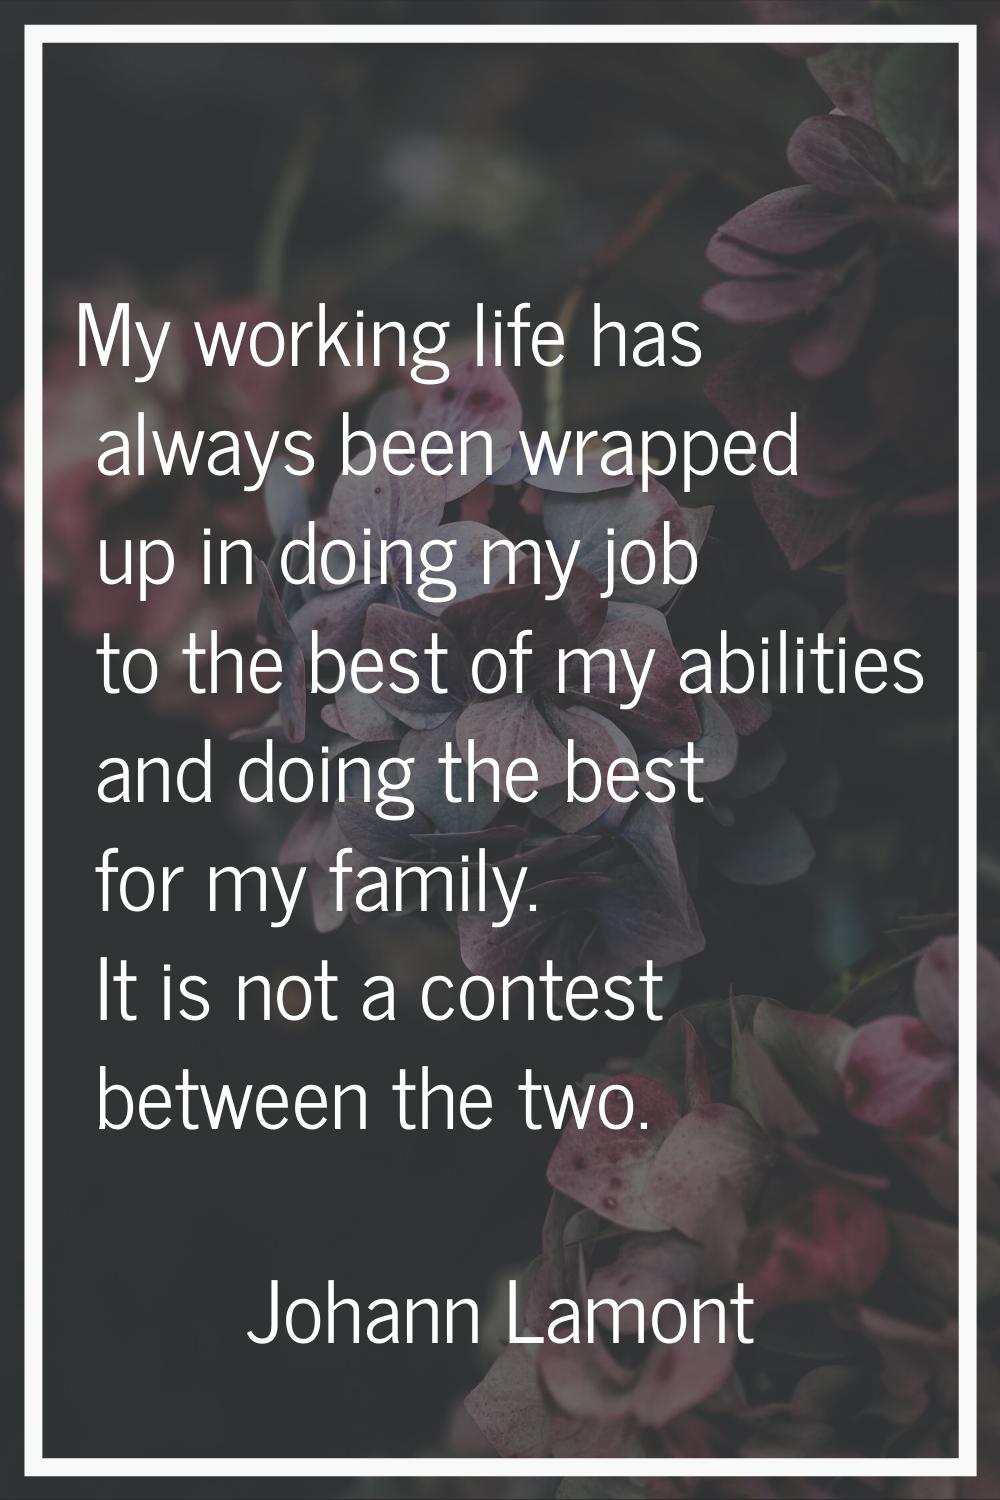 My working life has always been wrapped up in doing my job to the best of my abilities and doing th